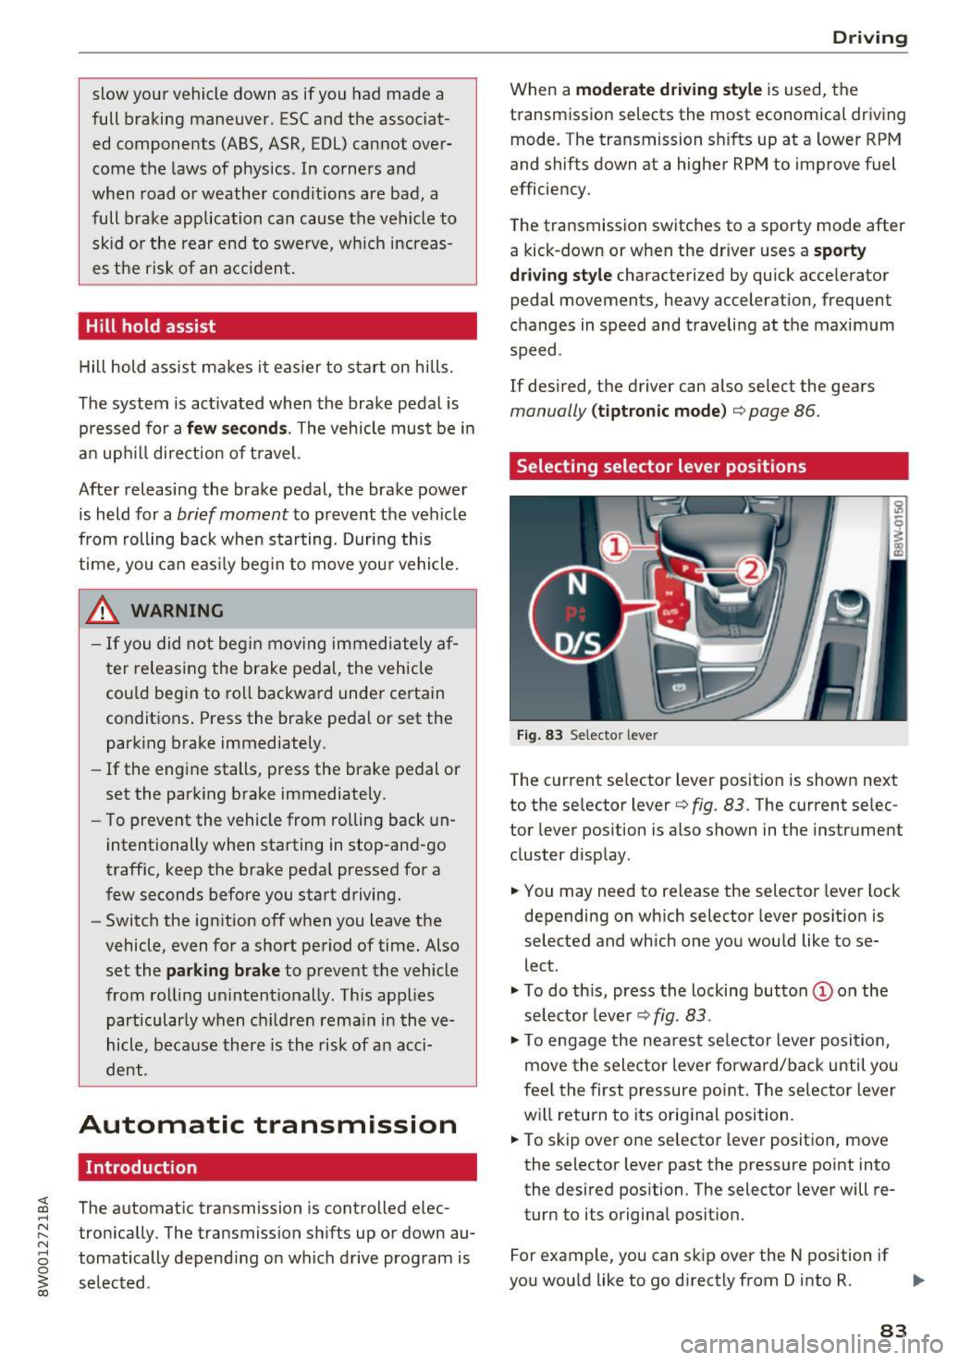 AUDI A4 2017  Owners Manual slow  your  vehicle down as  if you  had made  a 
full  braking  maneuver.  ESC and  the  associat ­
ed  components  (ABS, ASR, EDL) cannot  over­
come  the  laws of  physics . In  corners  and 
whe